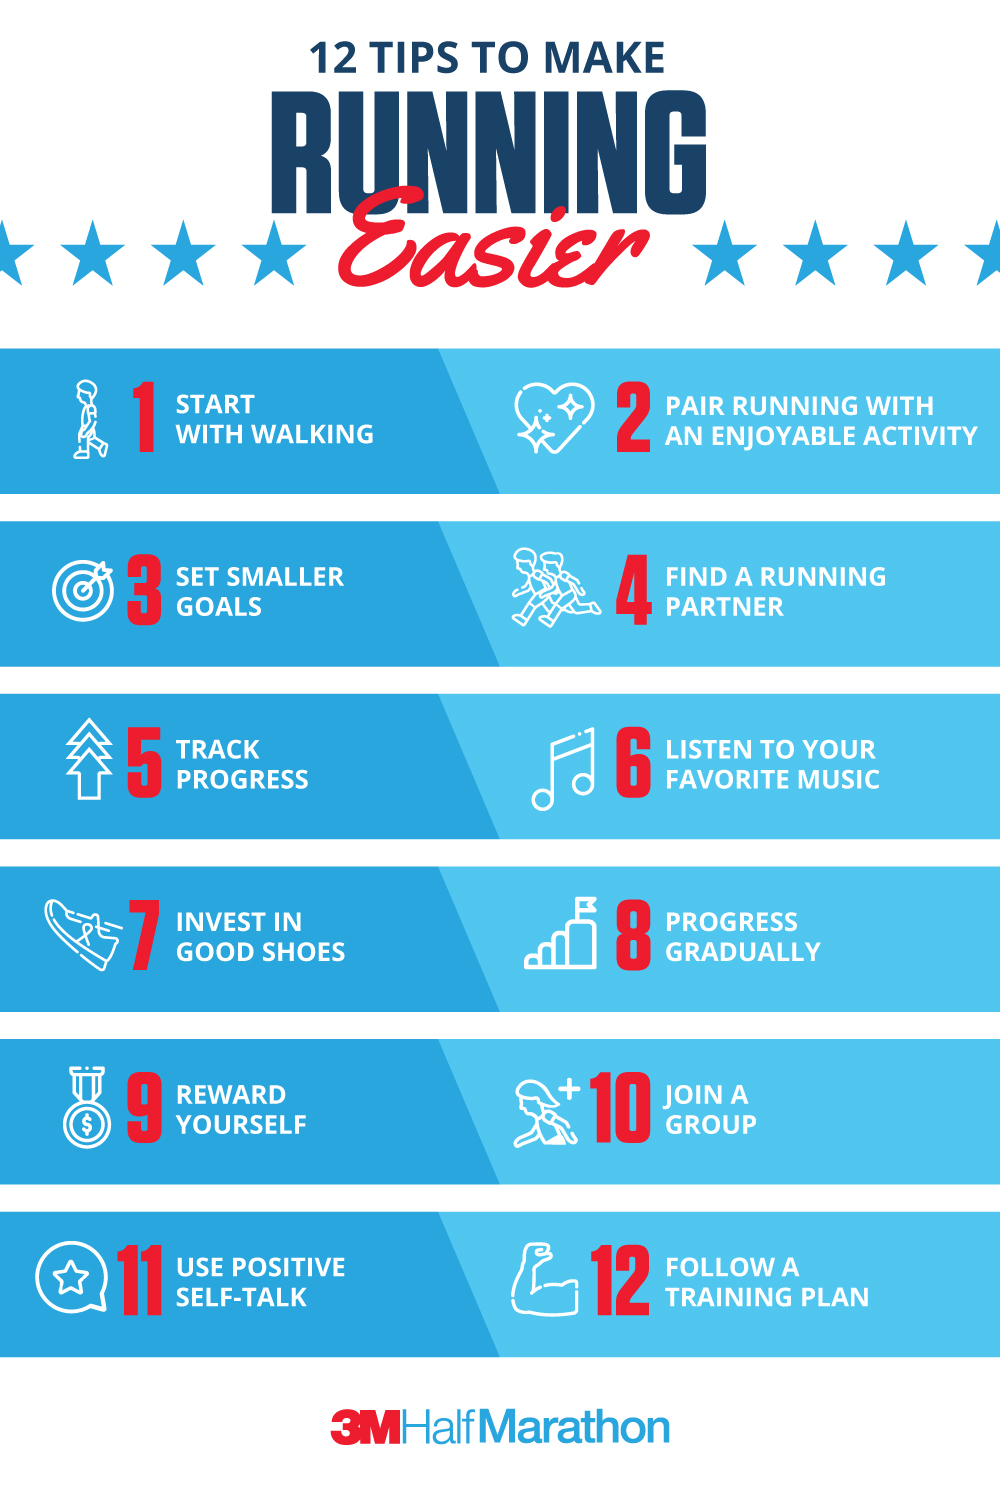 Make Running Easier When You Follow these 12 Tips